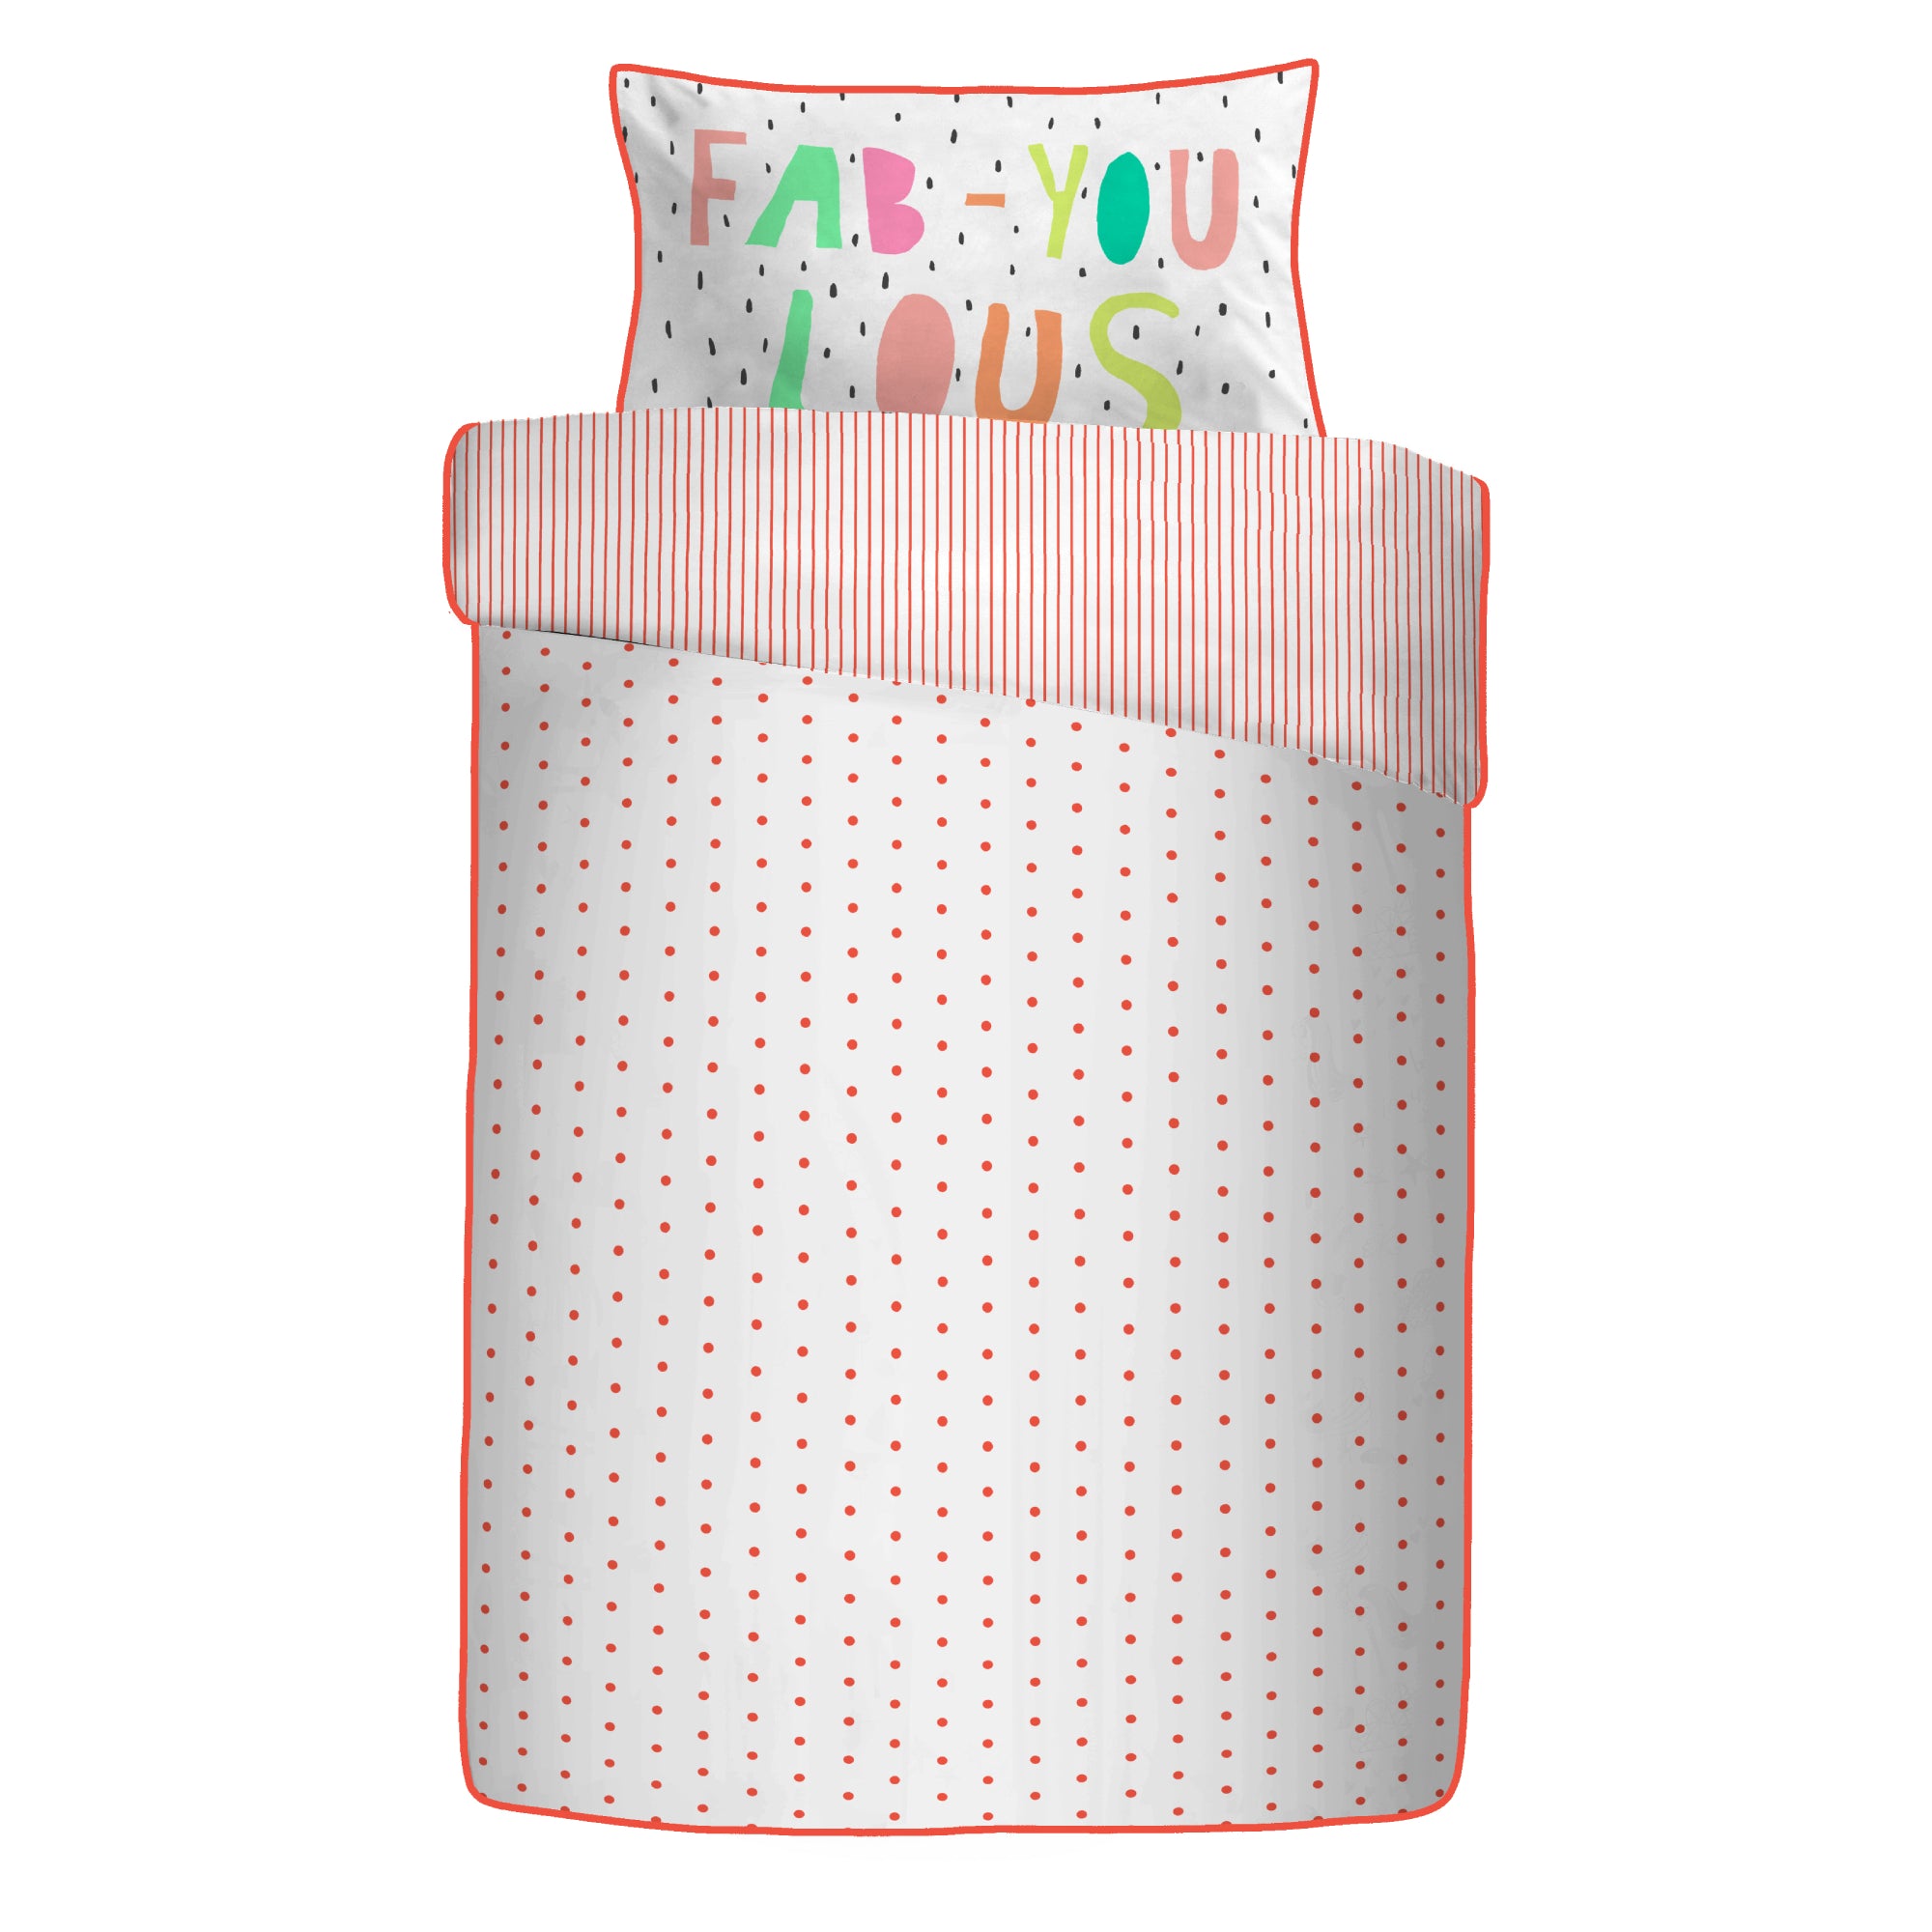 Duvet Cover Set Tilly Spot by Appletree Kids in Coral